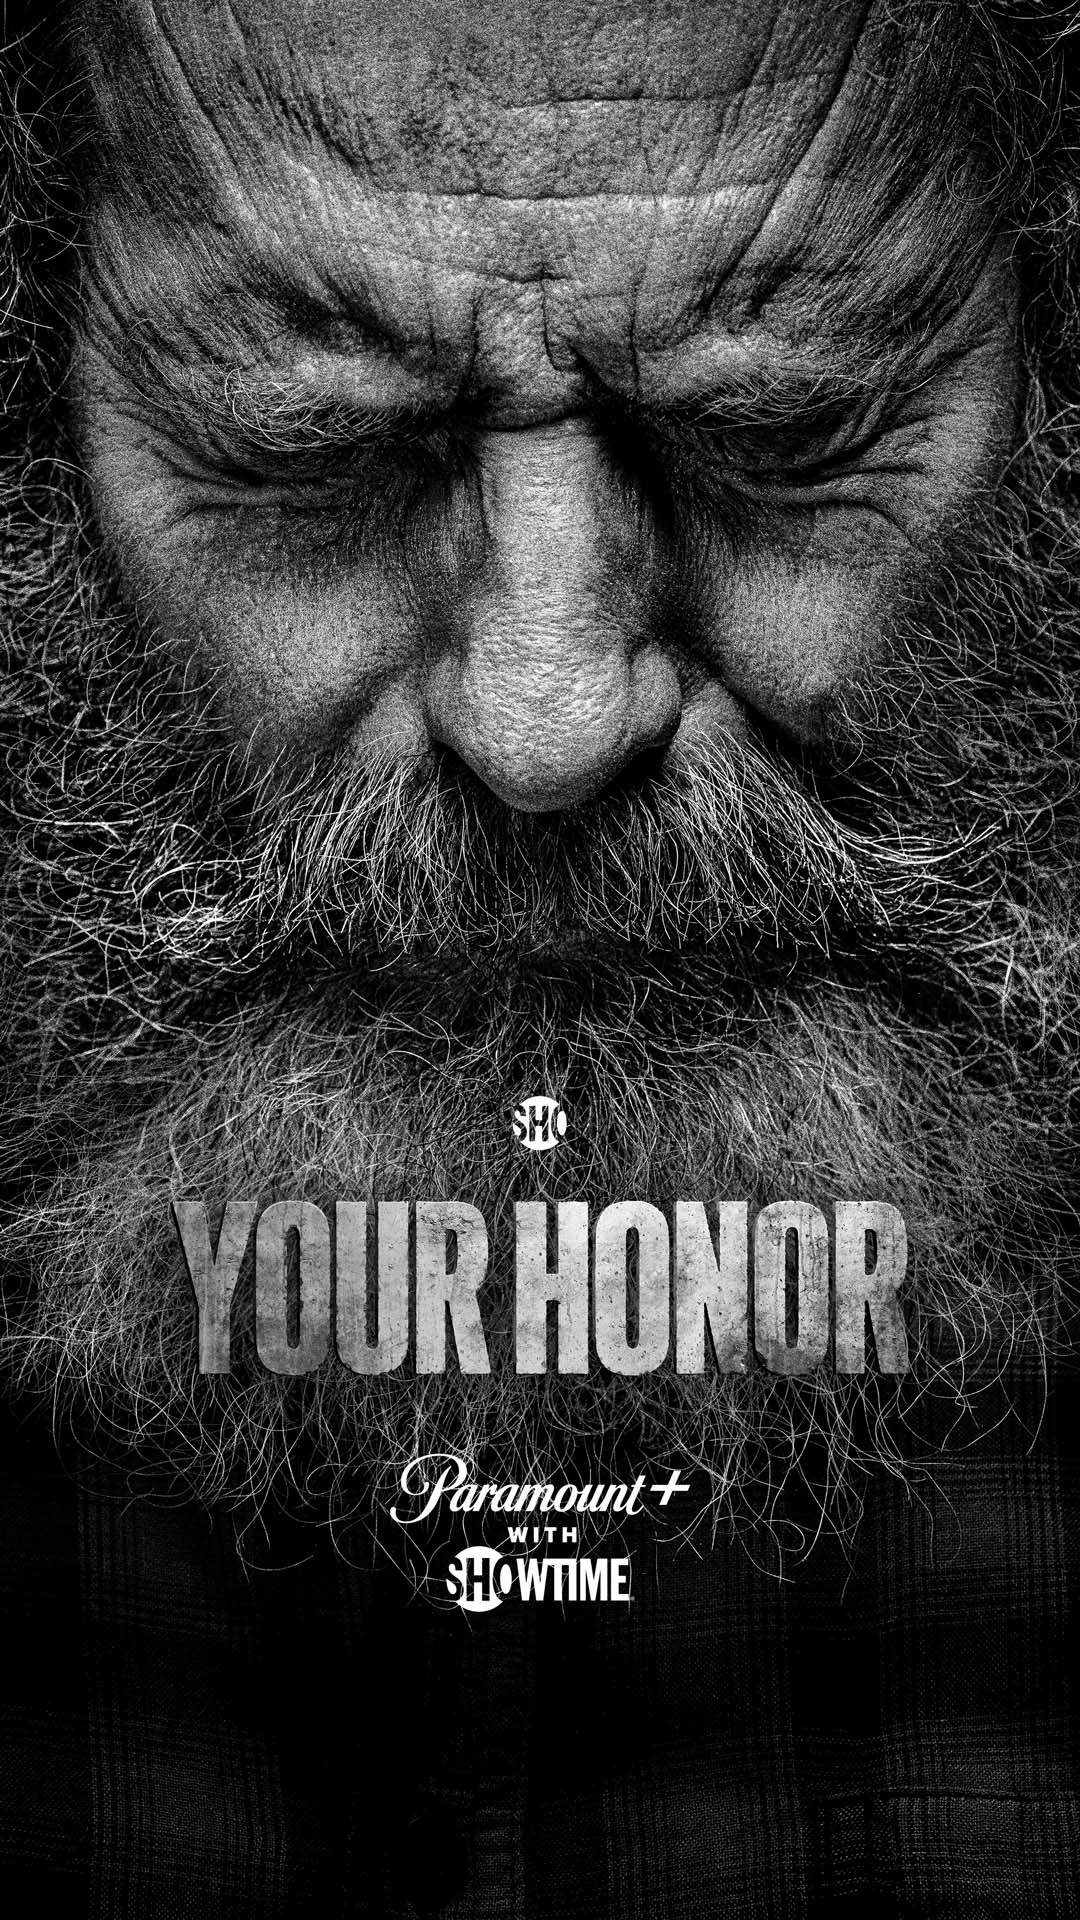 Your Honor, on Paramount+ with Showtime